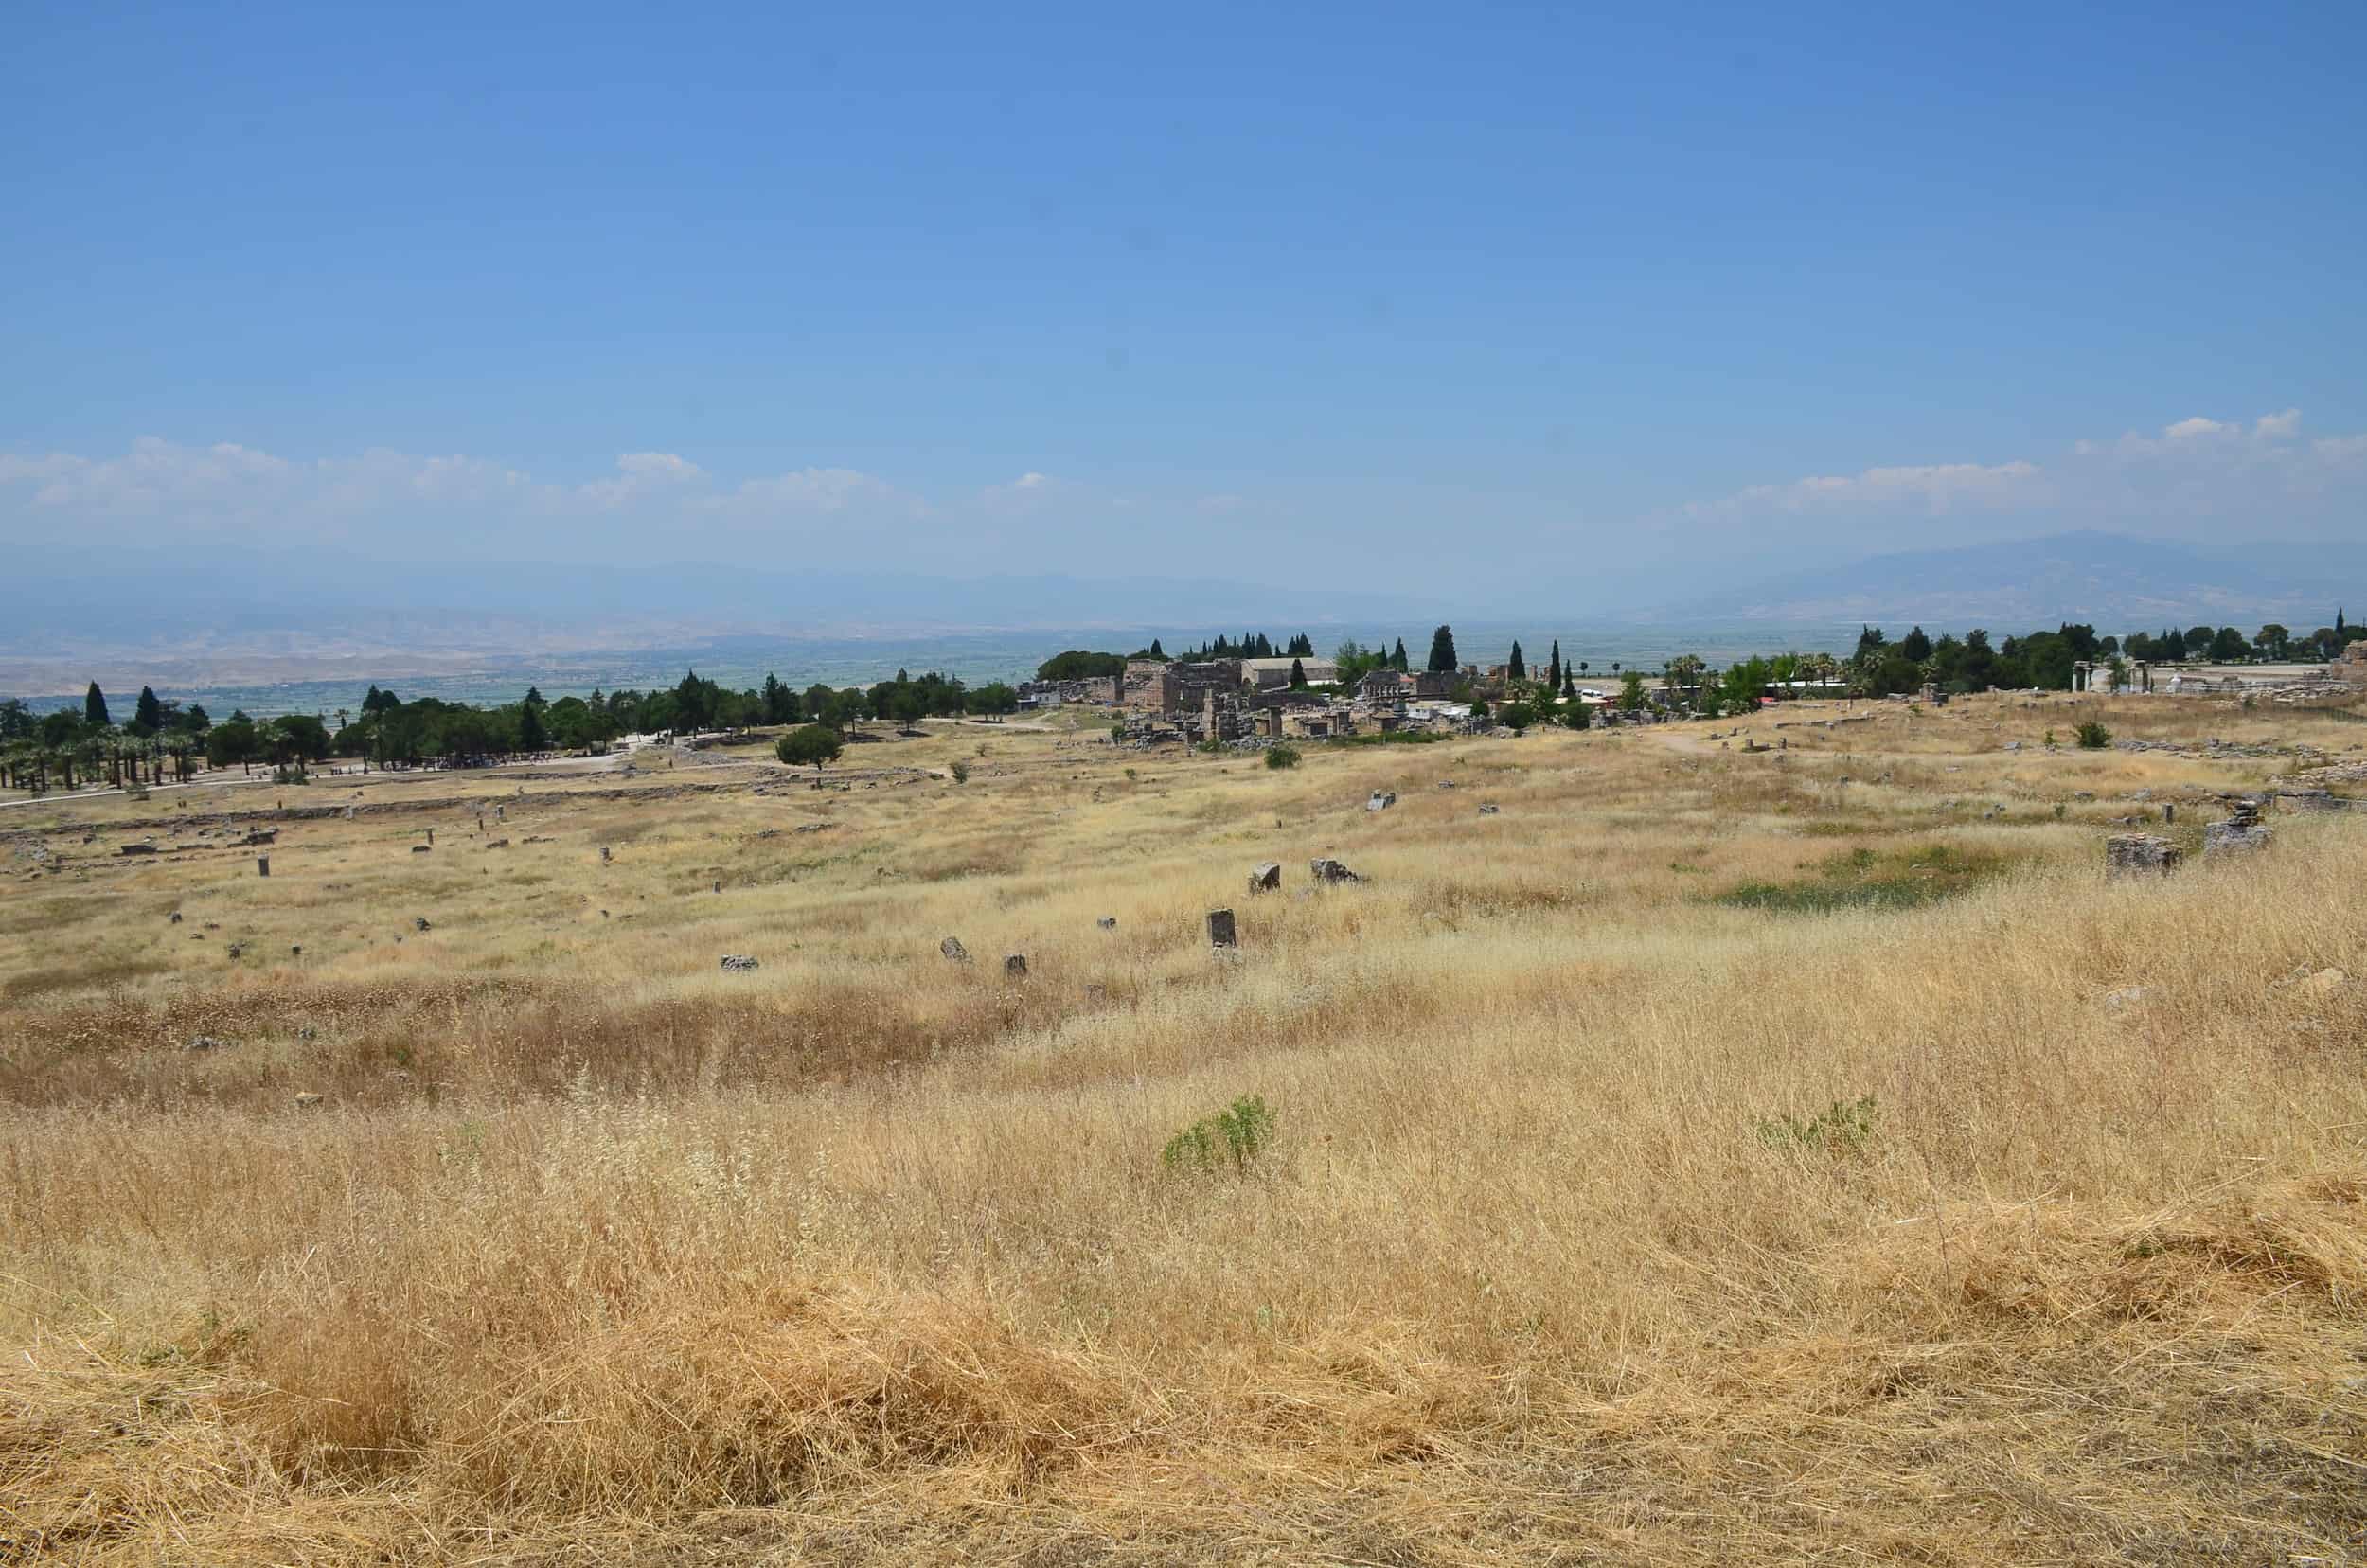 Looking northwest from the south side of Hierapolis